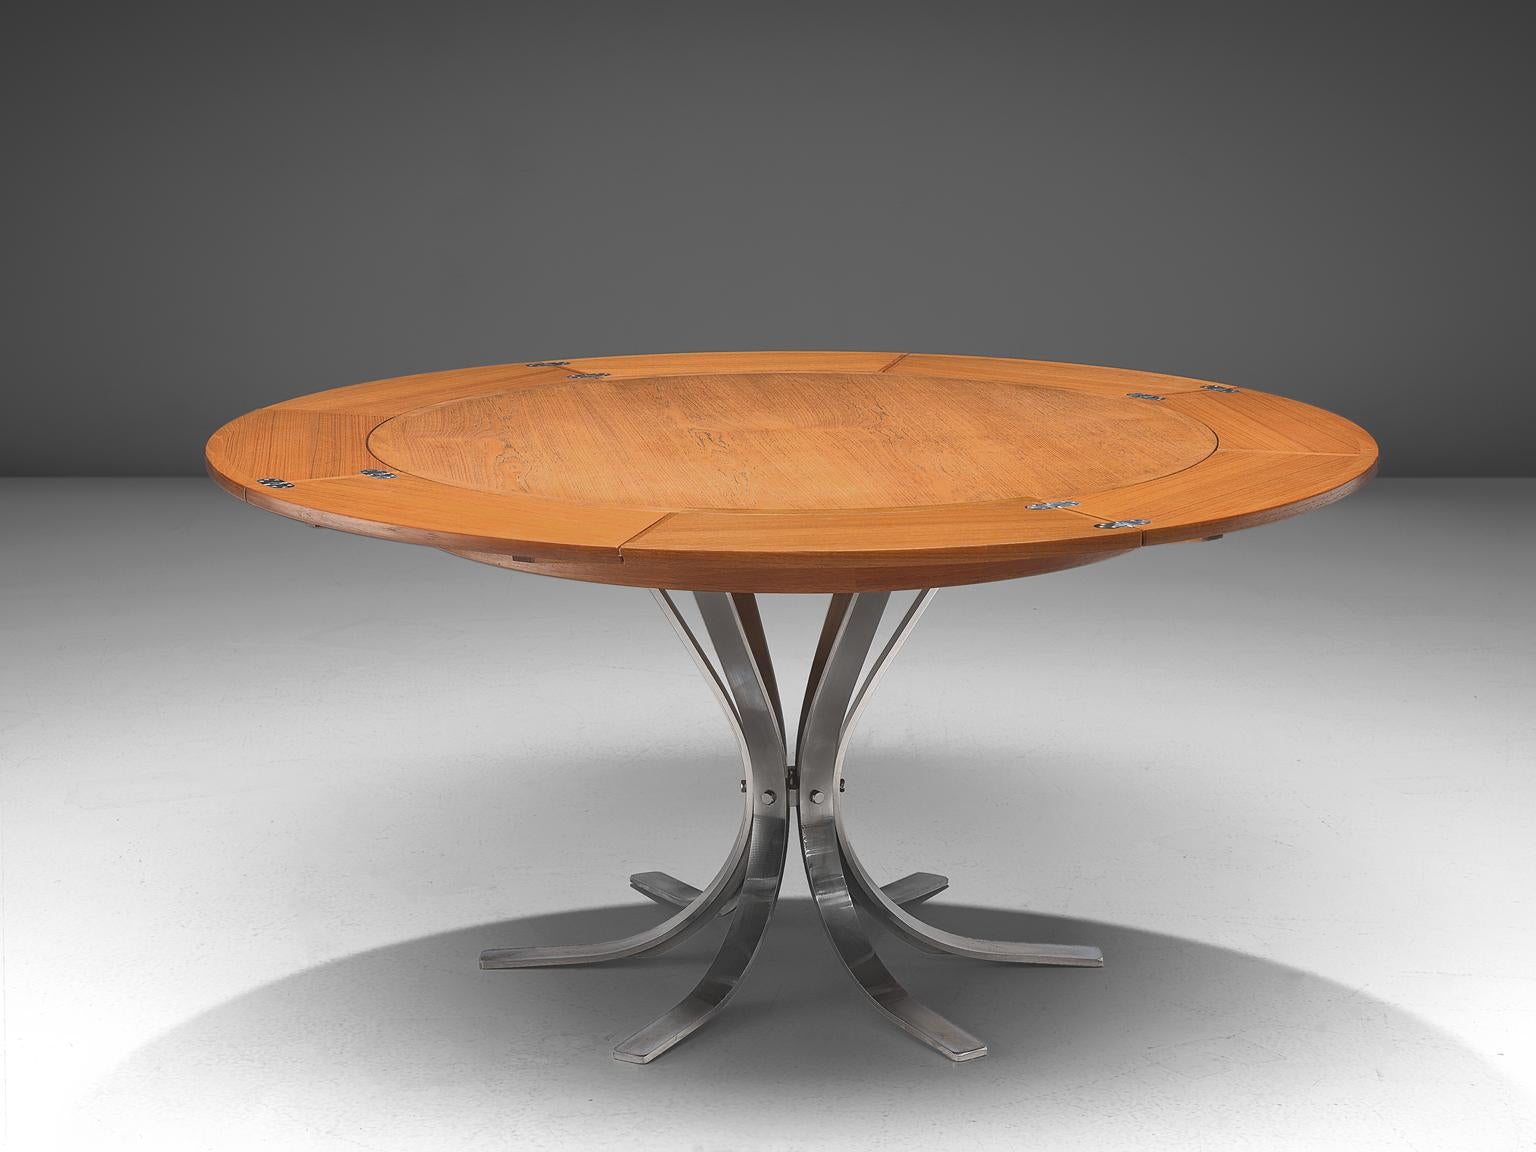 Round extend-able pedestal table, teak and steel, Dyrlund, Denmark, 1960s.

This circular, extendable table has a pedestal chrome base in a six star model and is finished with a teak top. The top has the ability to extend in diameter. Four